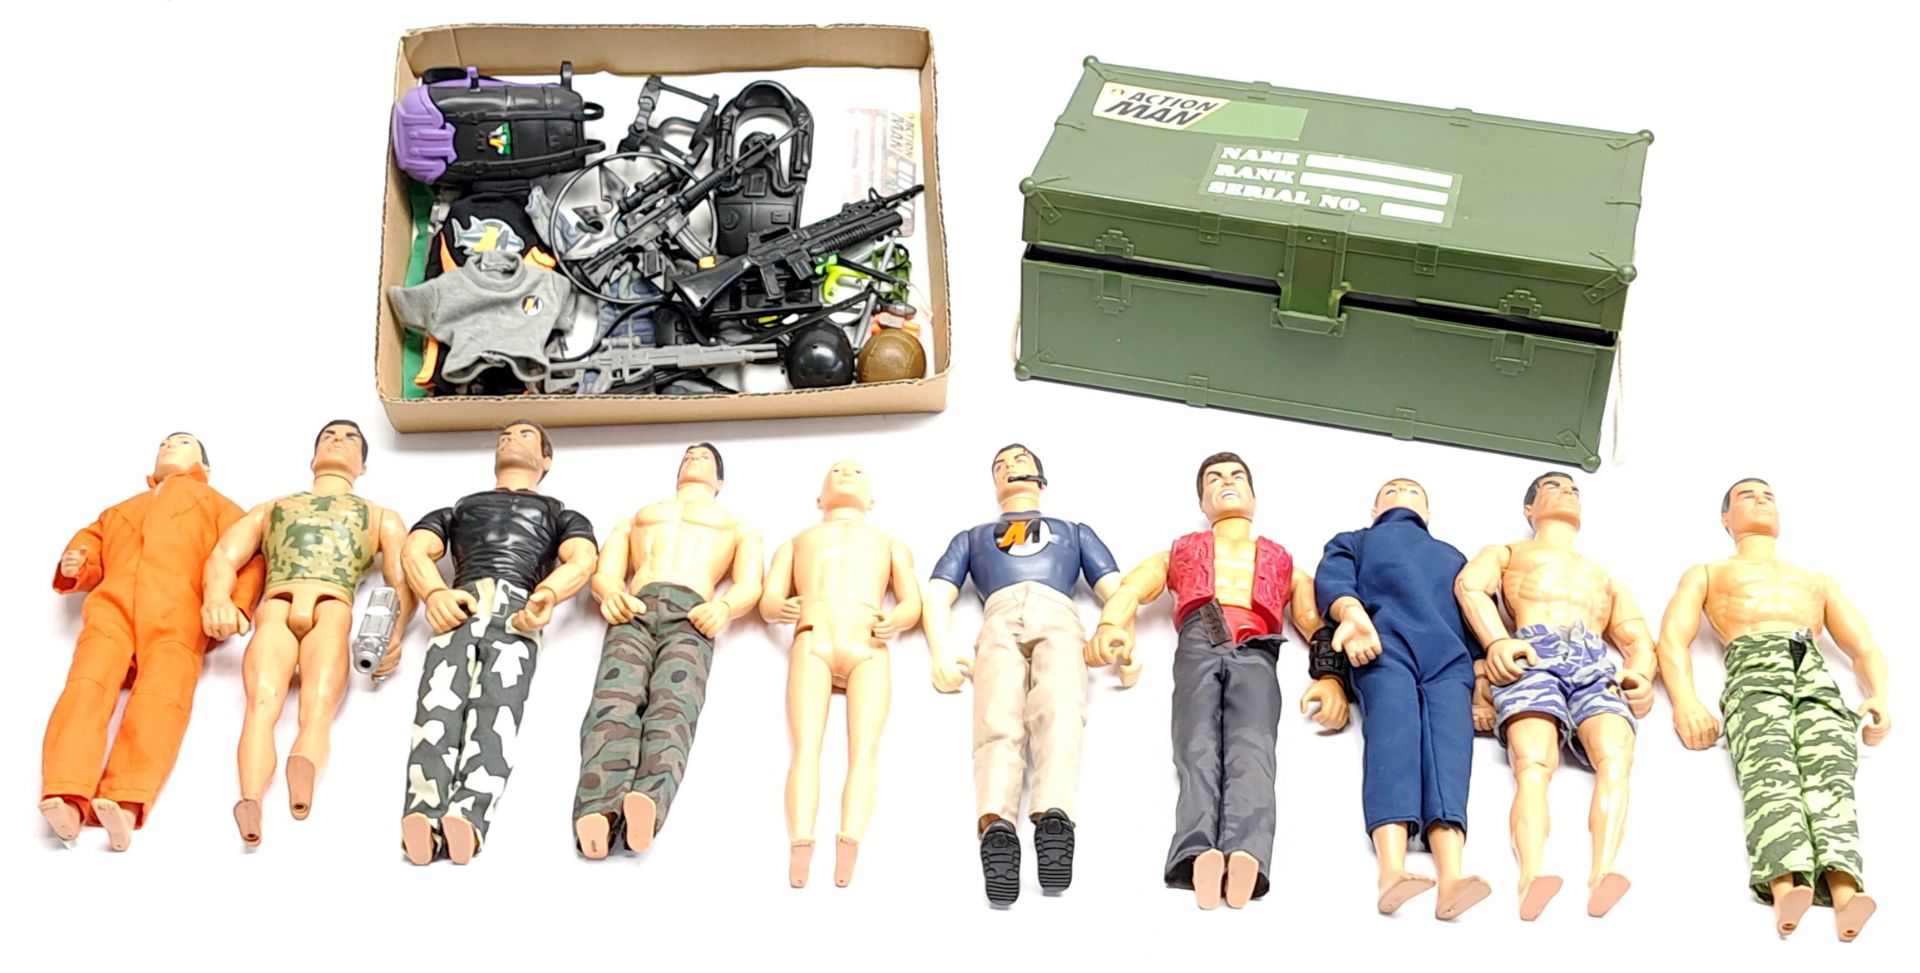 Hasbro modern Action Man, loose figures, part uniforms, weapons, ammo/kit storage box - not check...